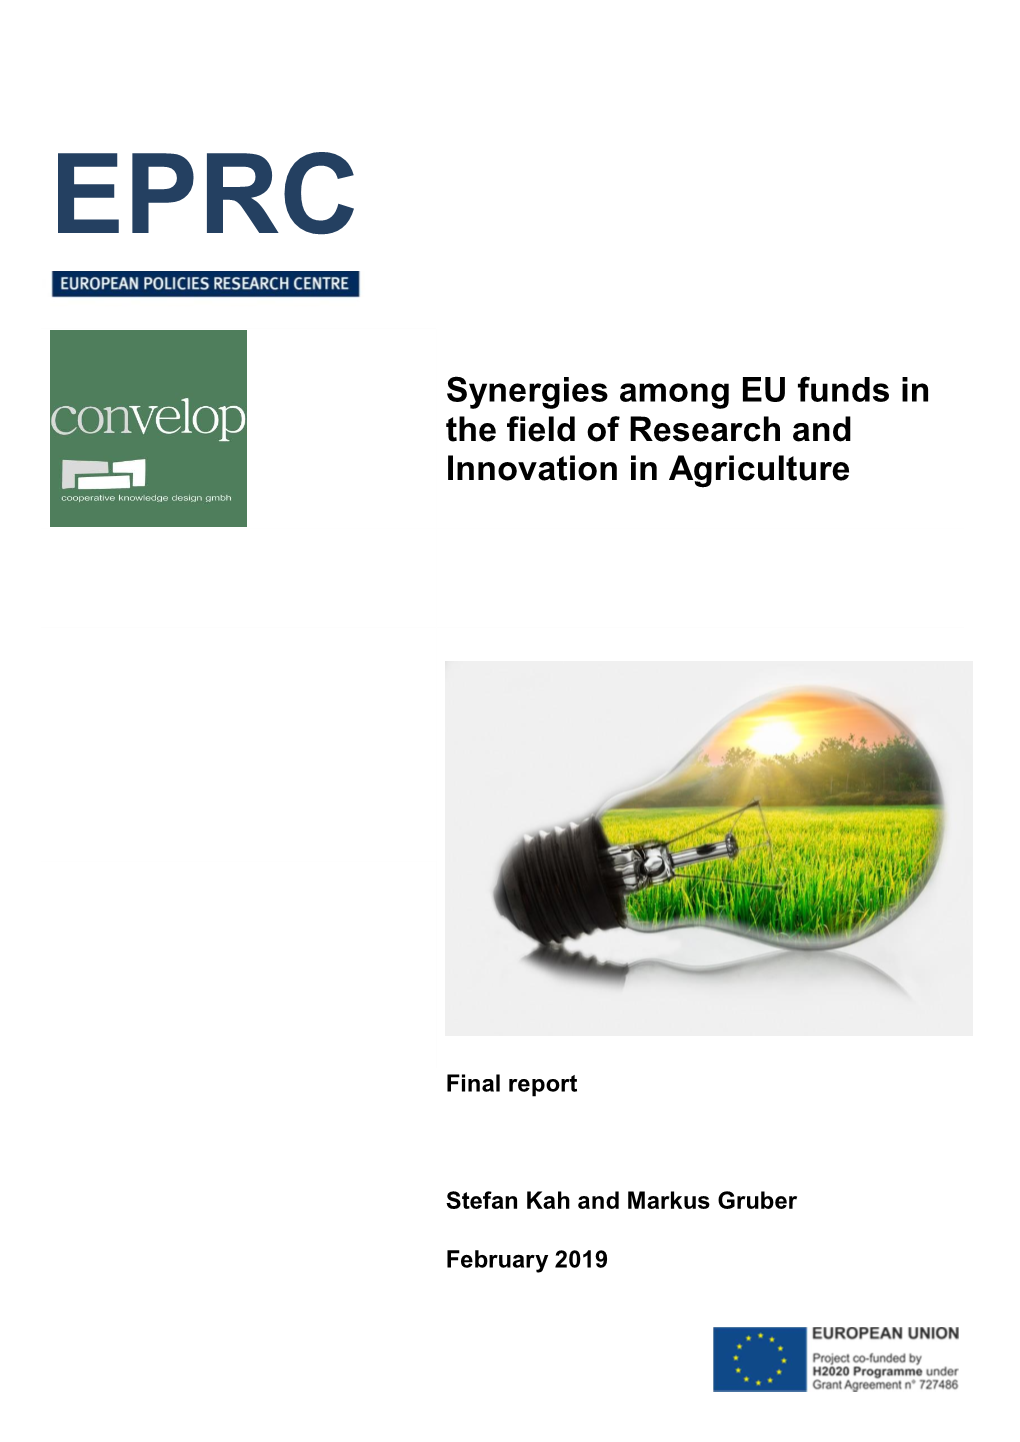 Synergies Among EU Funds in the Field of Research and Innovation in Agriculture